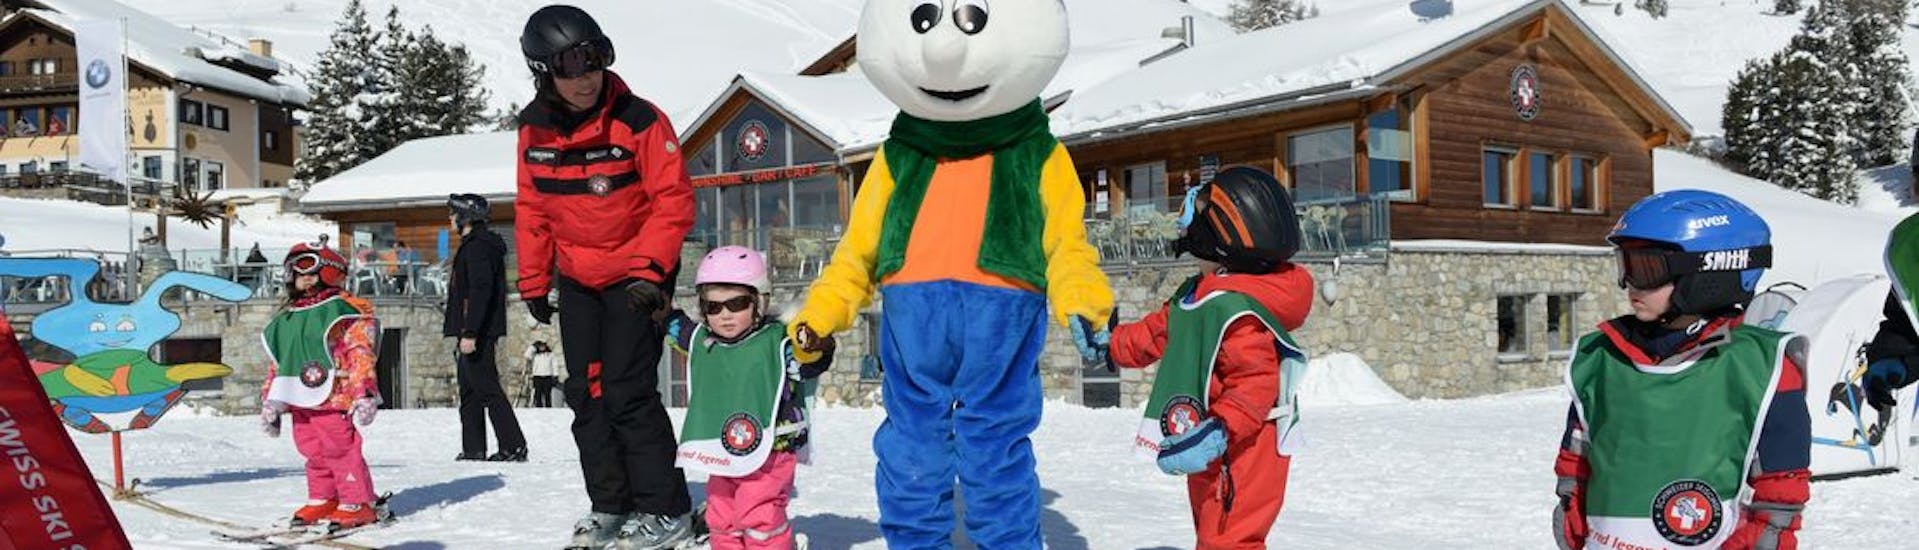 Children are enjoying their time together with the mascot Snowli during kids ski lessons for first-timers with Swiss Ski School St. Moritz the Red Legends.